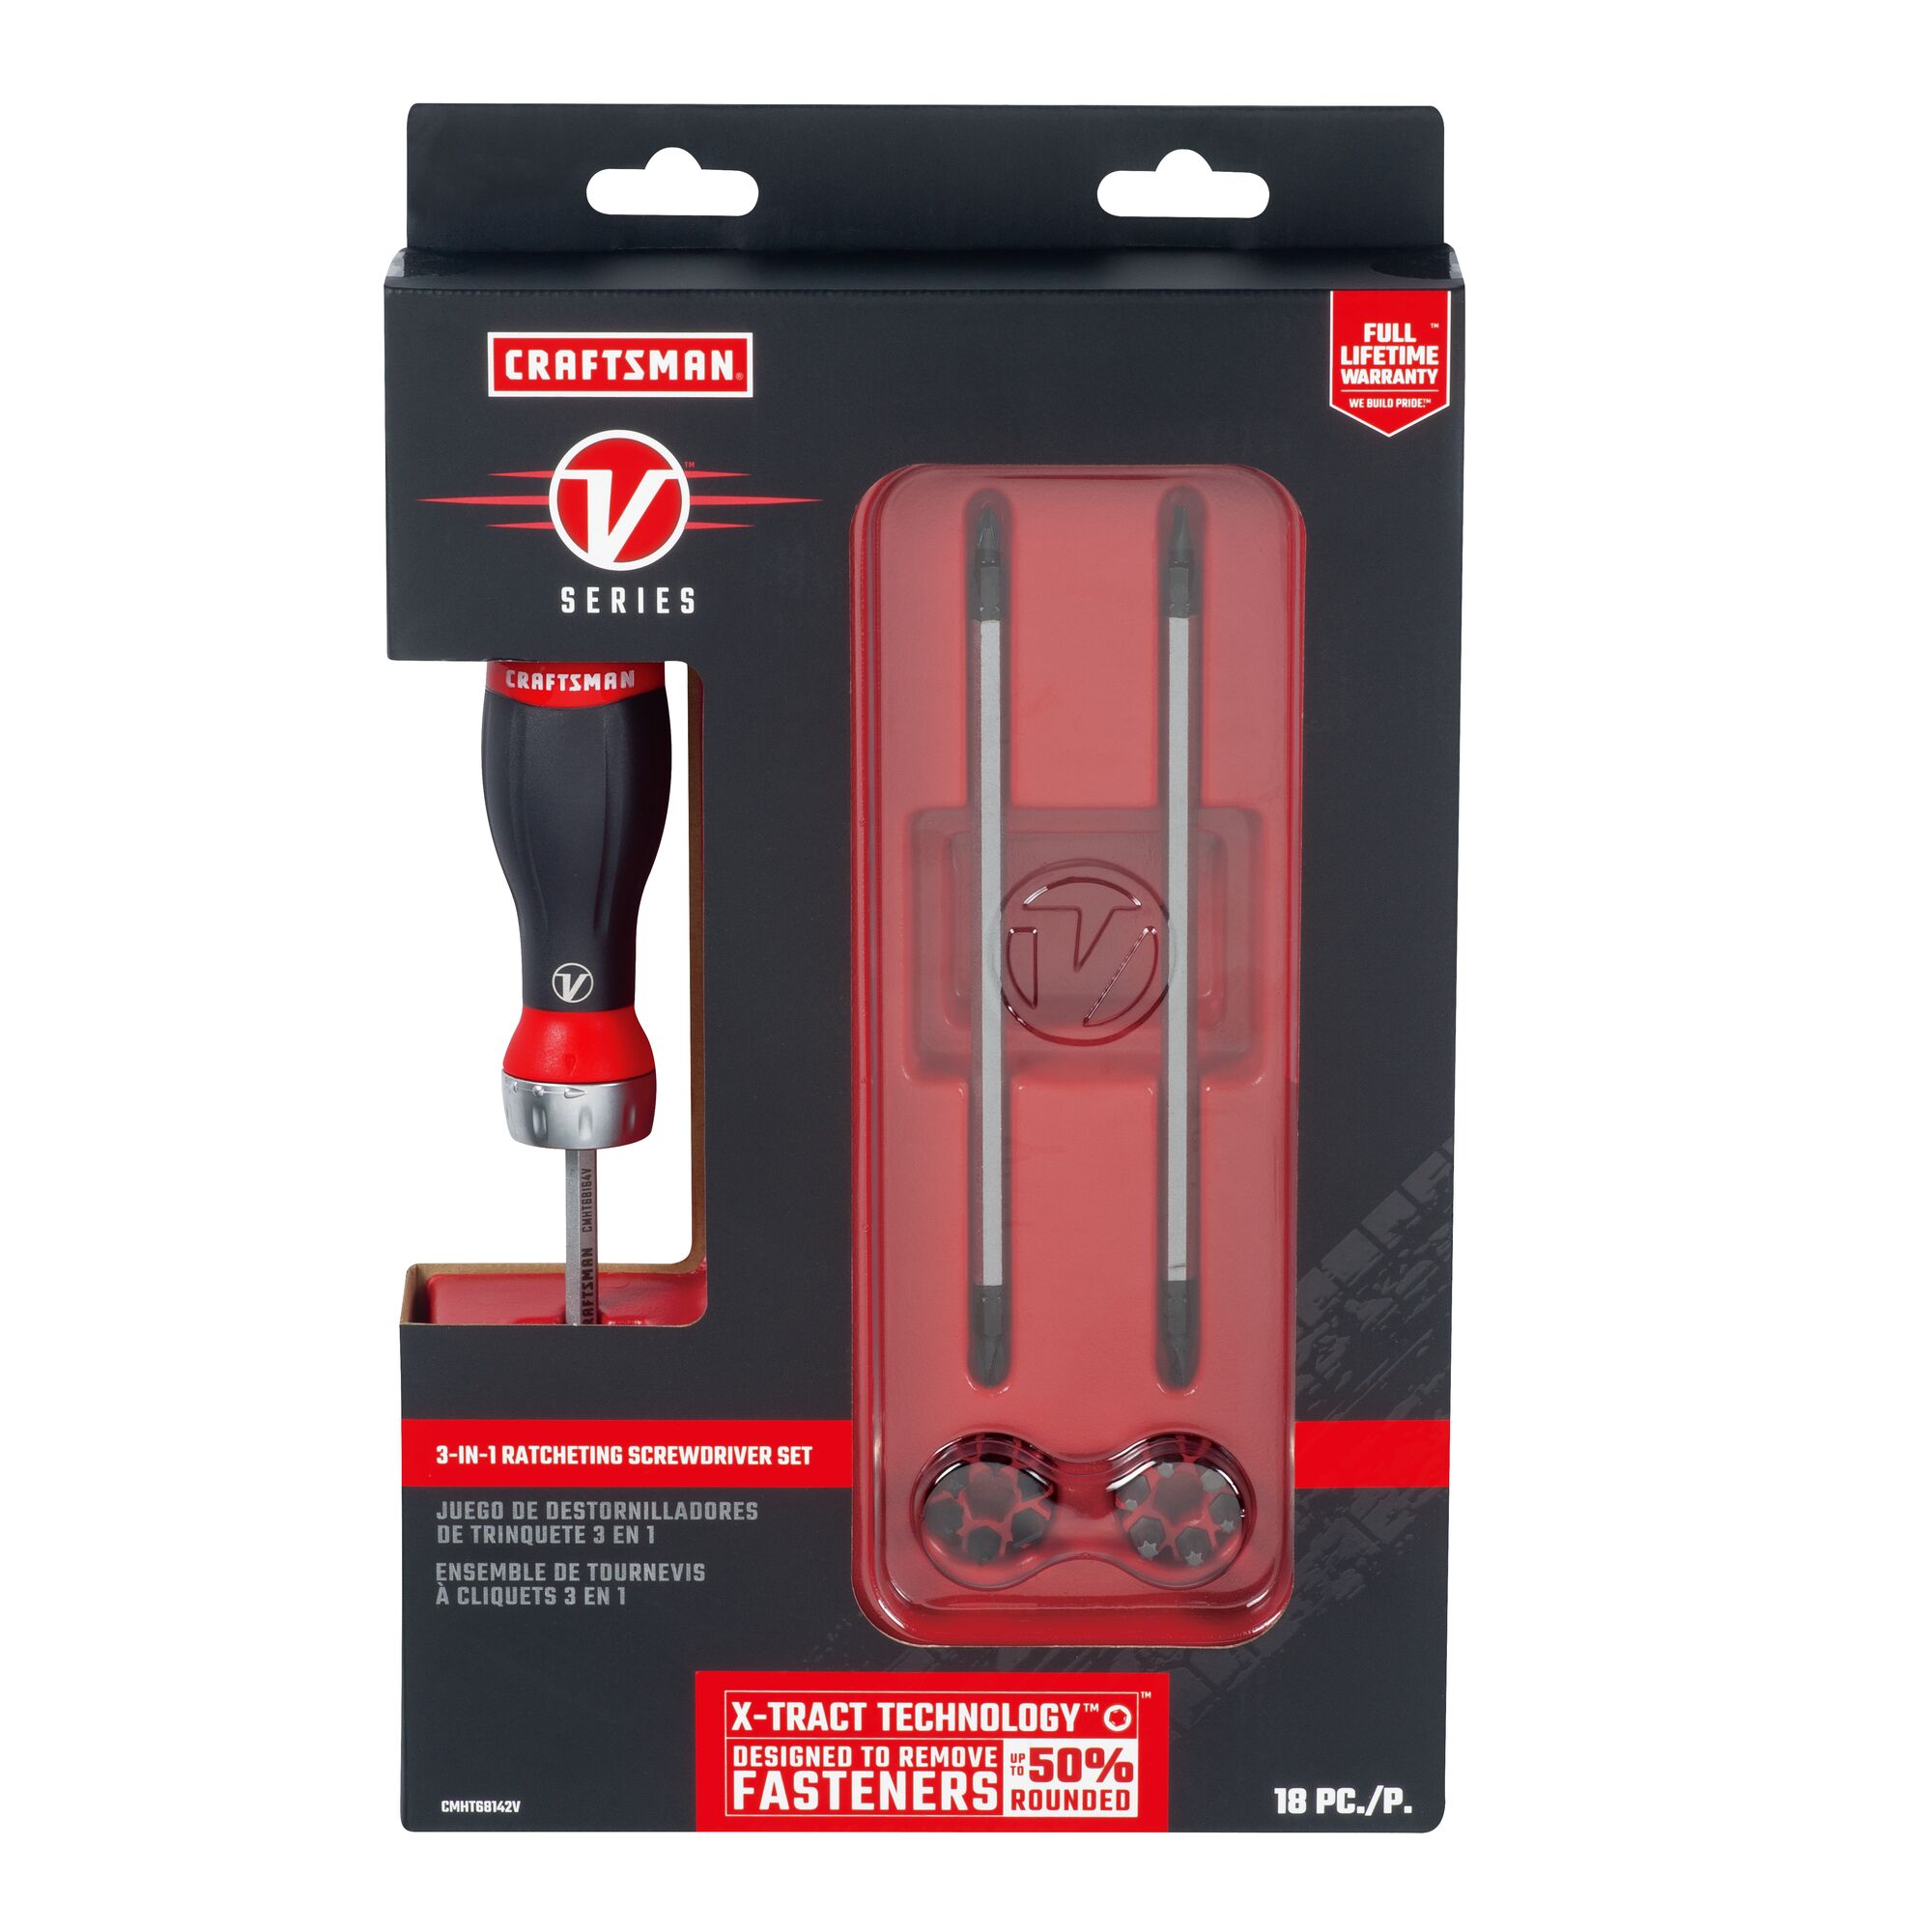 V Series 18 piece 3 in 1 Ratcheting ScrewDriver X Tract Technology Bit Set in card box packaging.